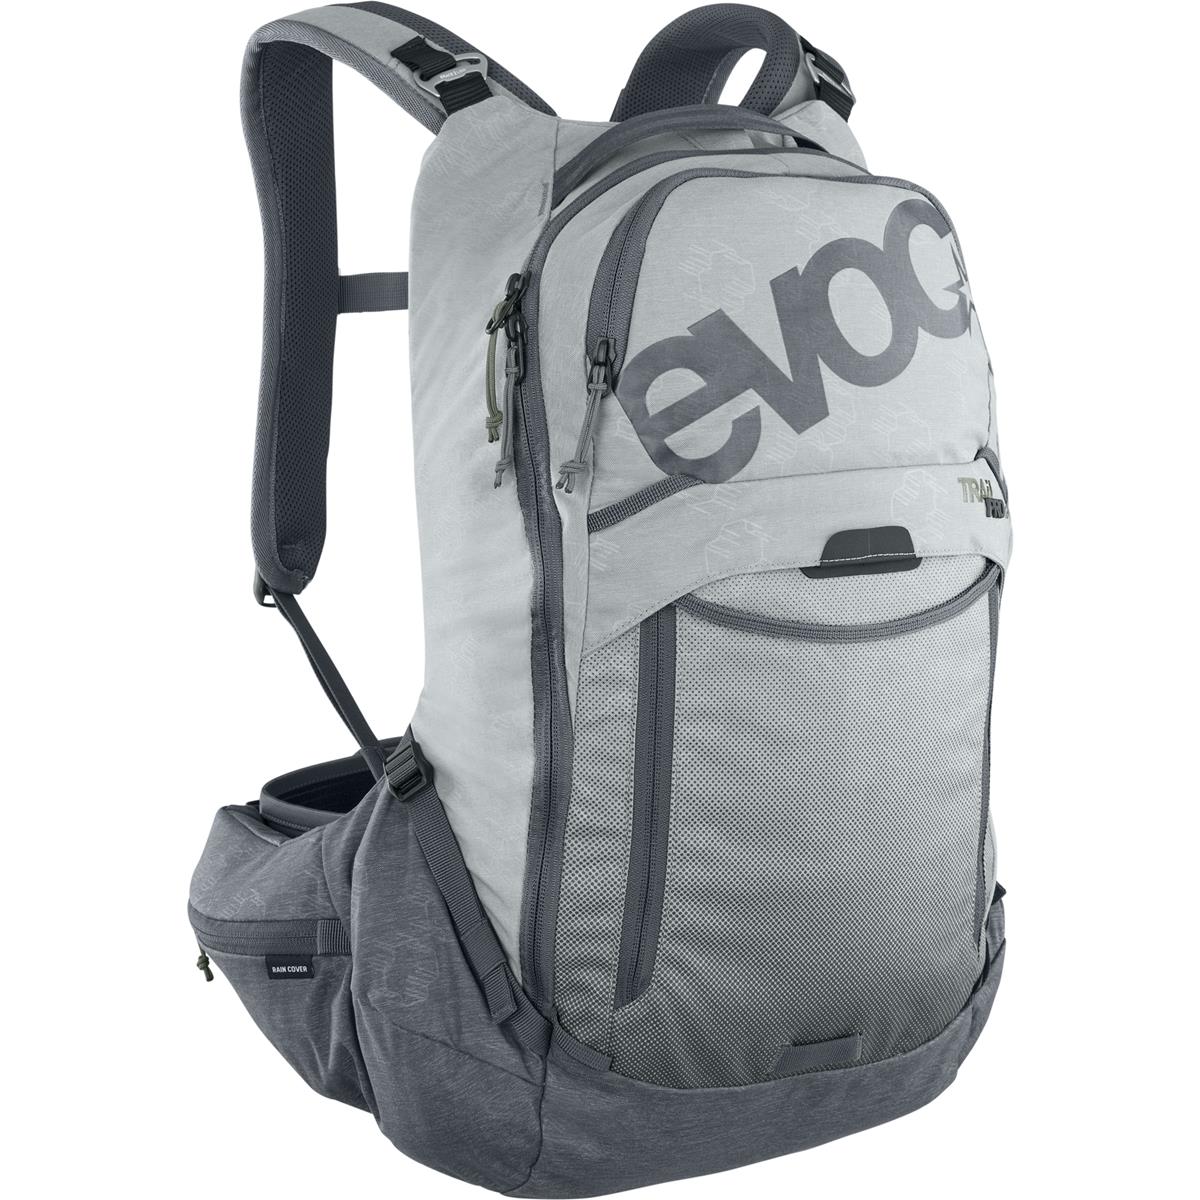 Evoc Protector Backpack Trail Pro 16 16L - Stone/Carbon Gray